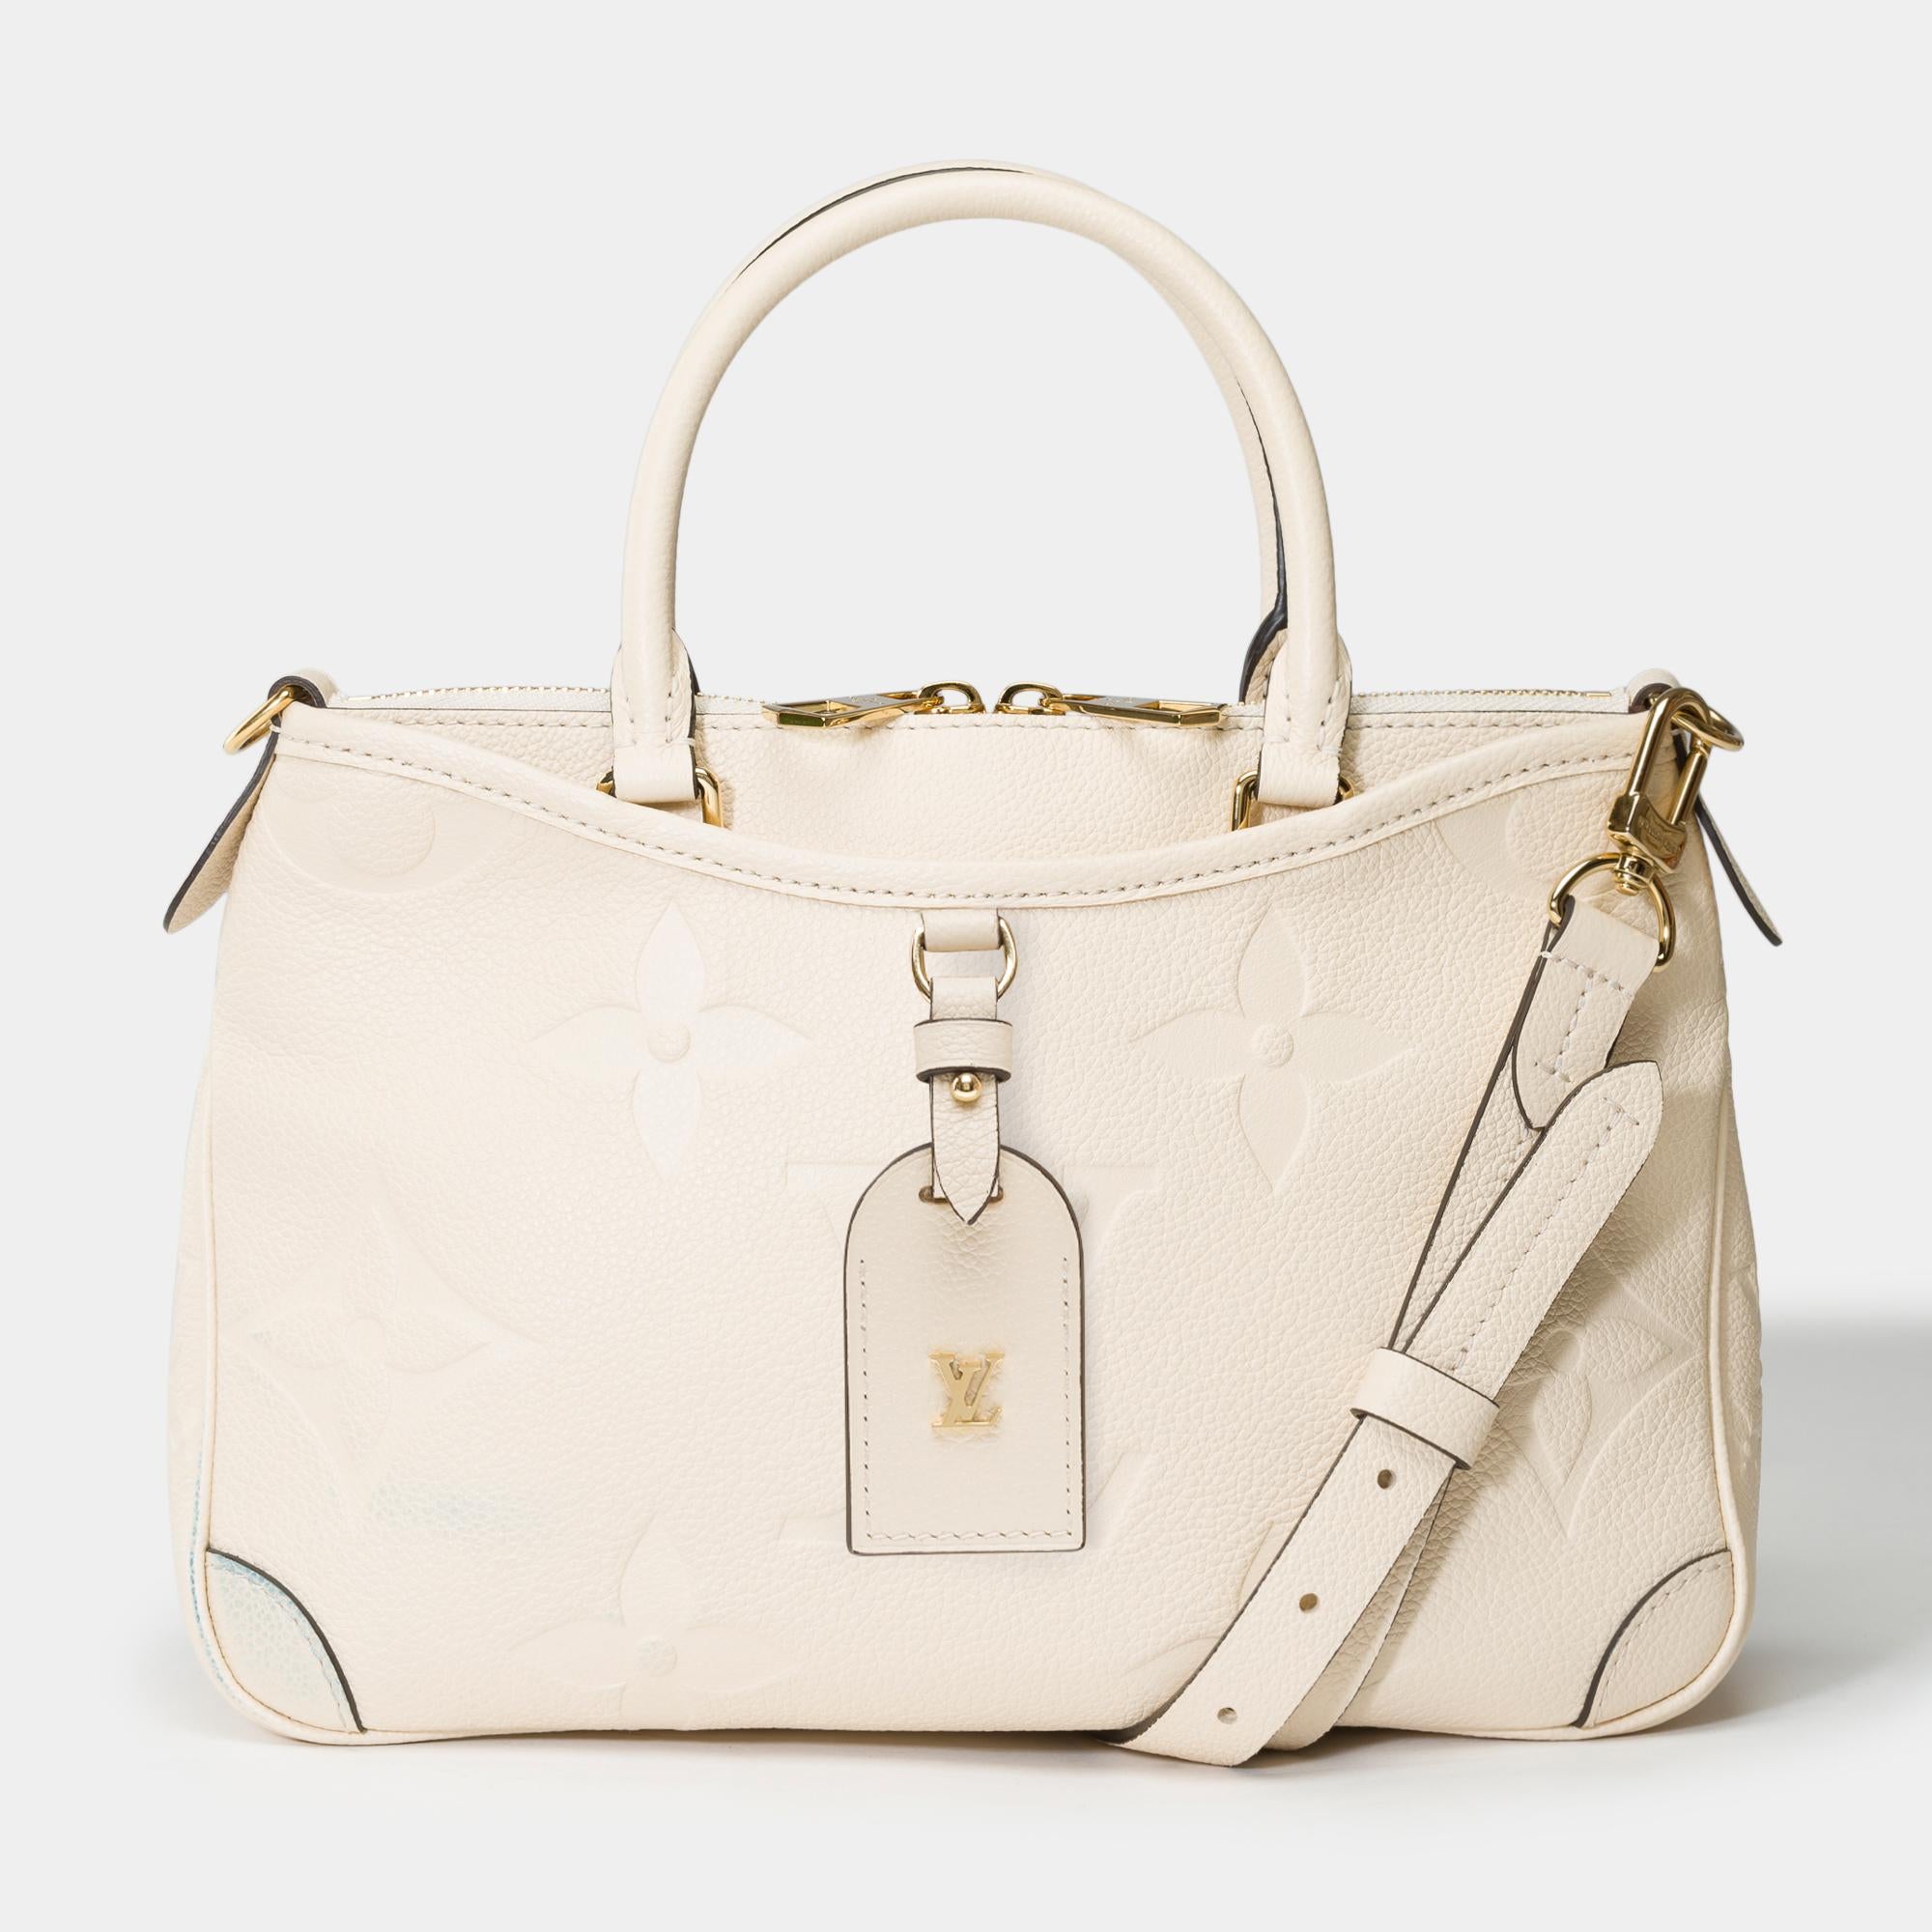 Featuring​ ​a​ ​more​ ​compact​ ​size​ ​and​ ​multiple​ ​zippered​ ​compartments,​ ​this​ ​Trianon​ ​PM​ ​bag​ ​in​ ​embossed​ ​Monogram​ ​Empreinte​ ​leather​ ​is​ ​the​ ​perfect​ ​alternative​ ​to​ ​the​ ​traditional​ ​tote.​ ​Its​ ​V-shaped​